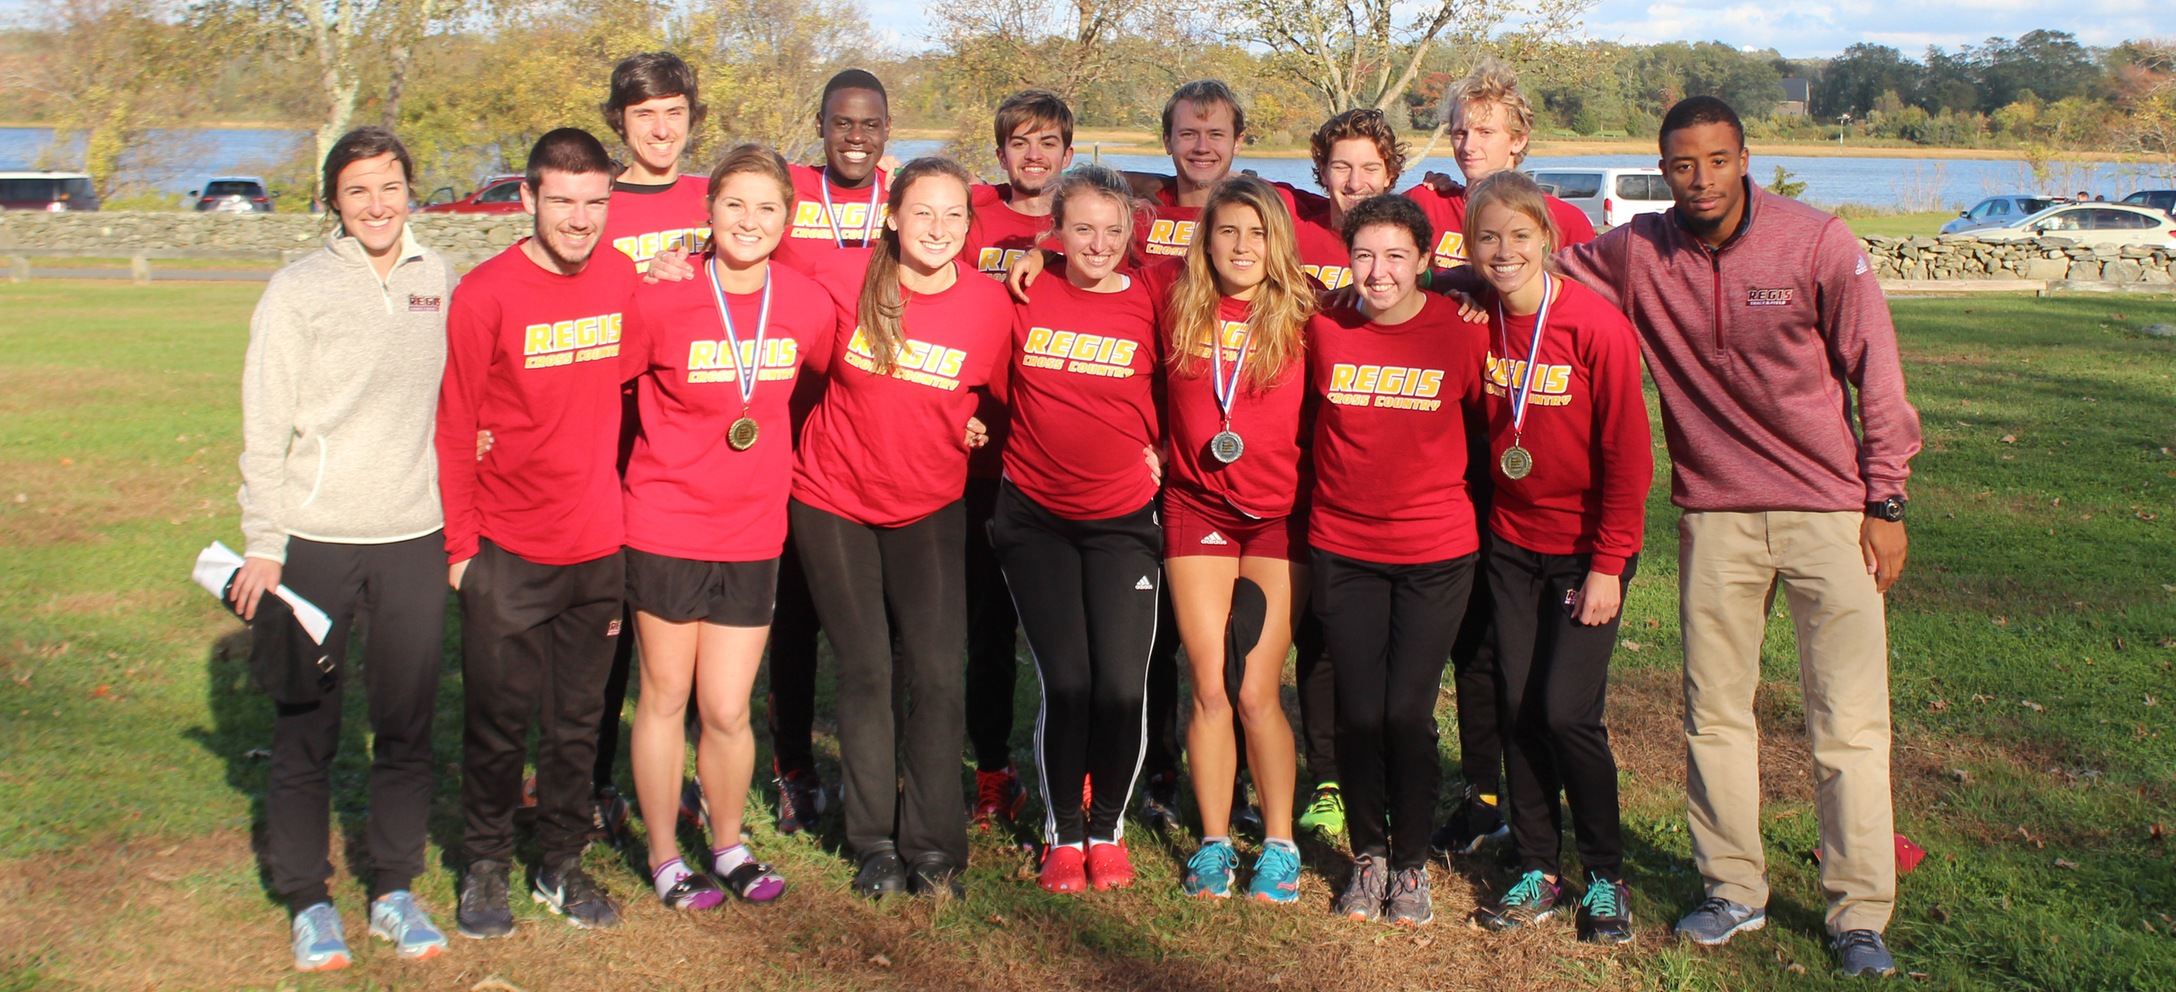 Men's and Women's Cross Country Both Finish in Top 4 at GNAC Championships